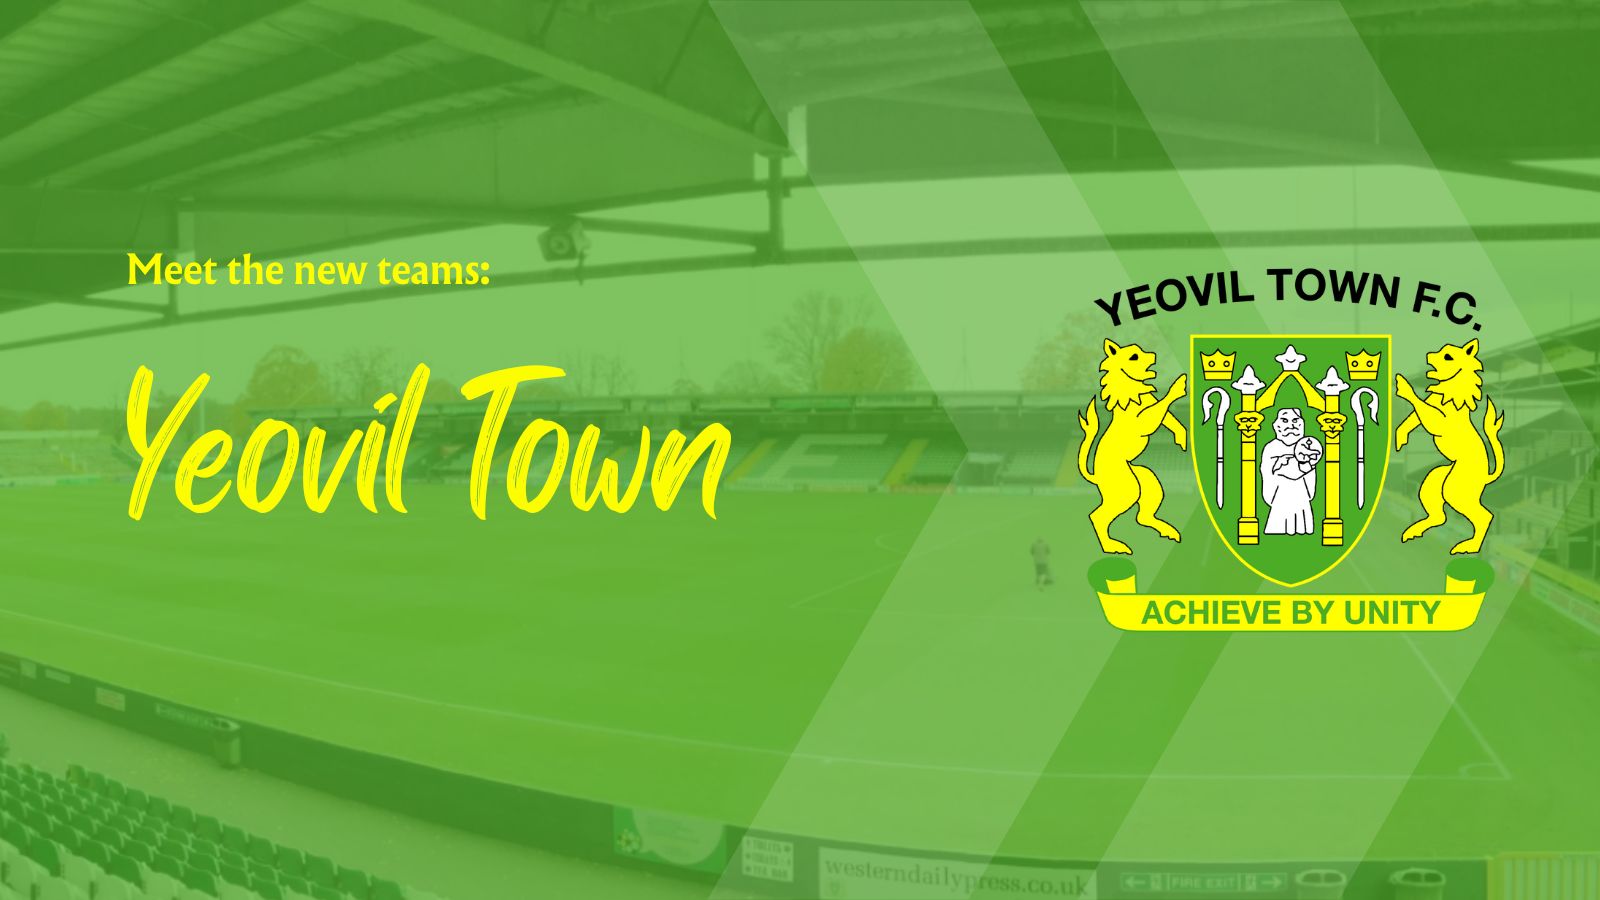 yeovil-town-fc-20-football-club-facts